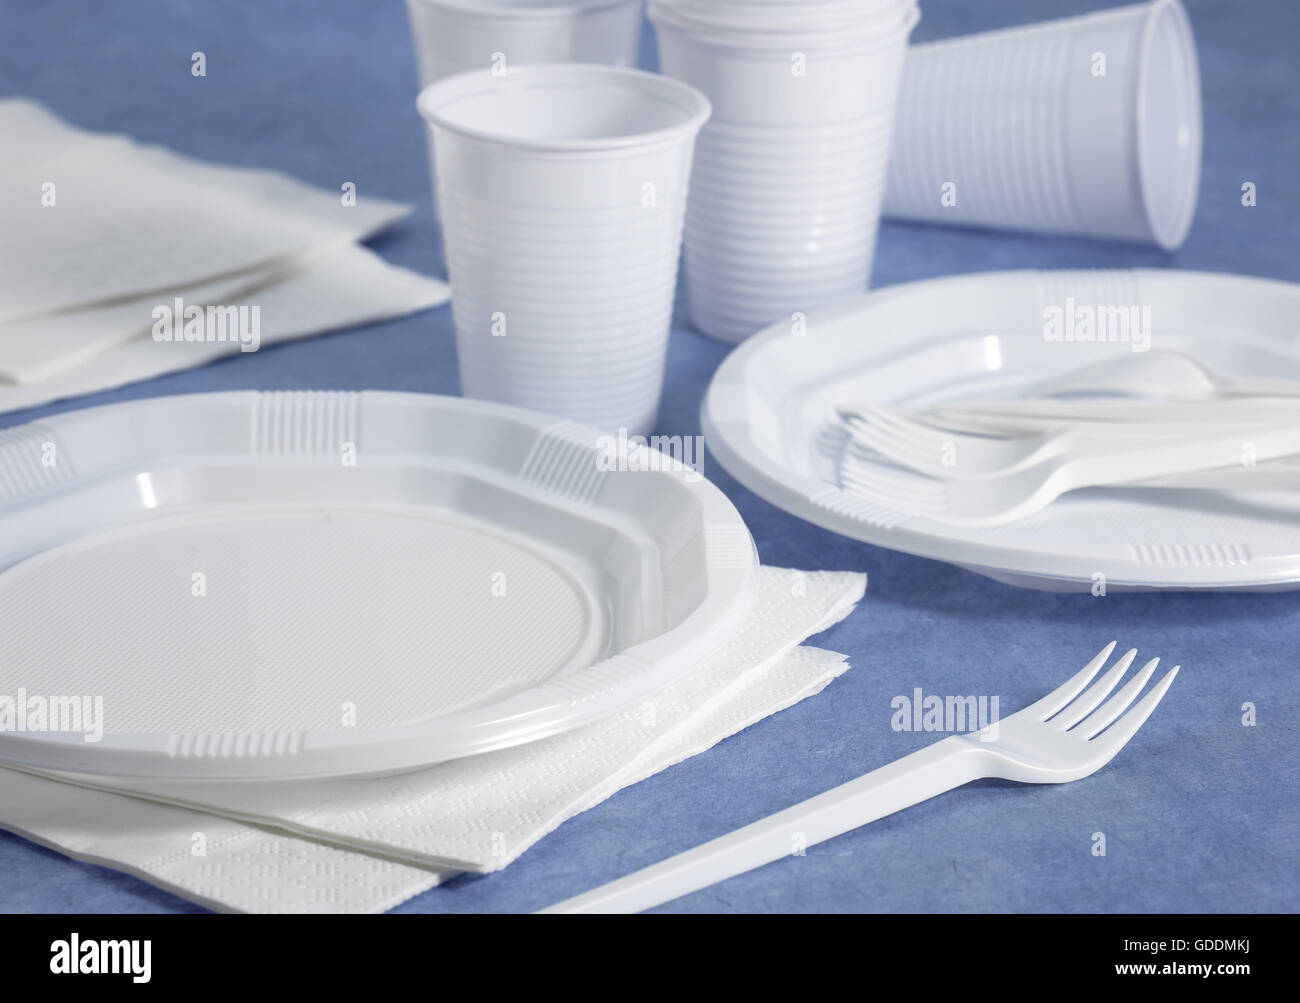 Plastic Plates with Paper Nakins Stock Photo